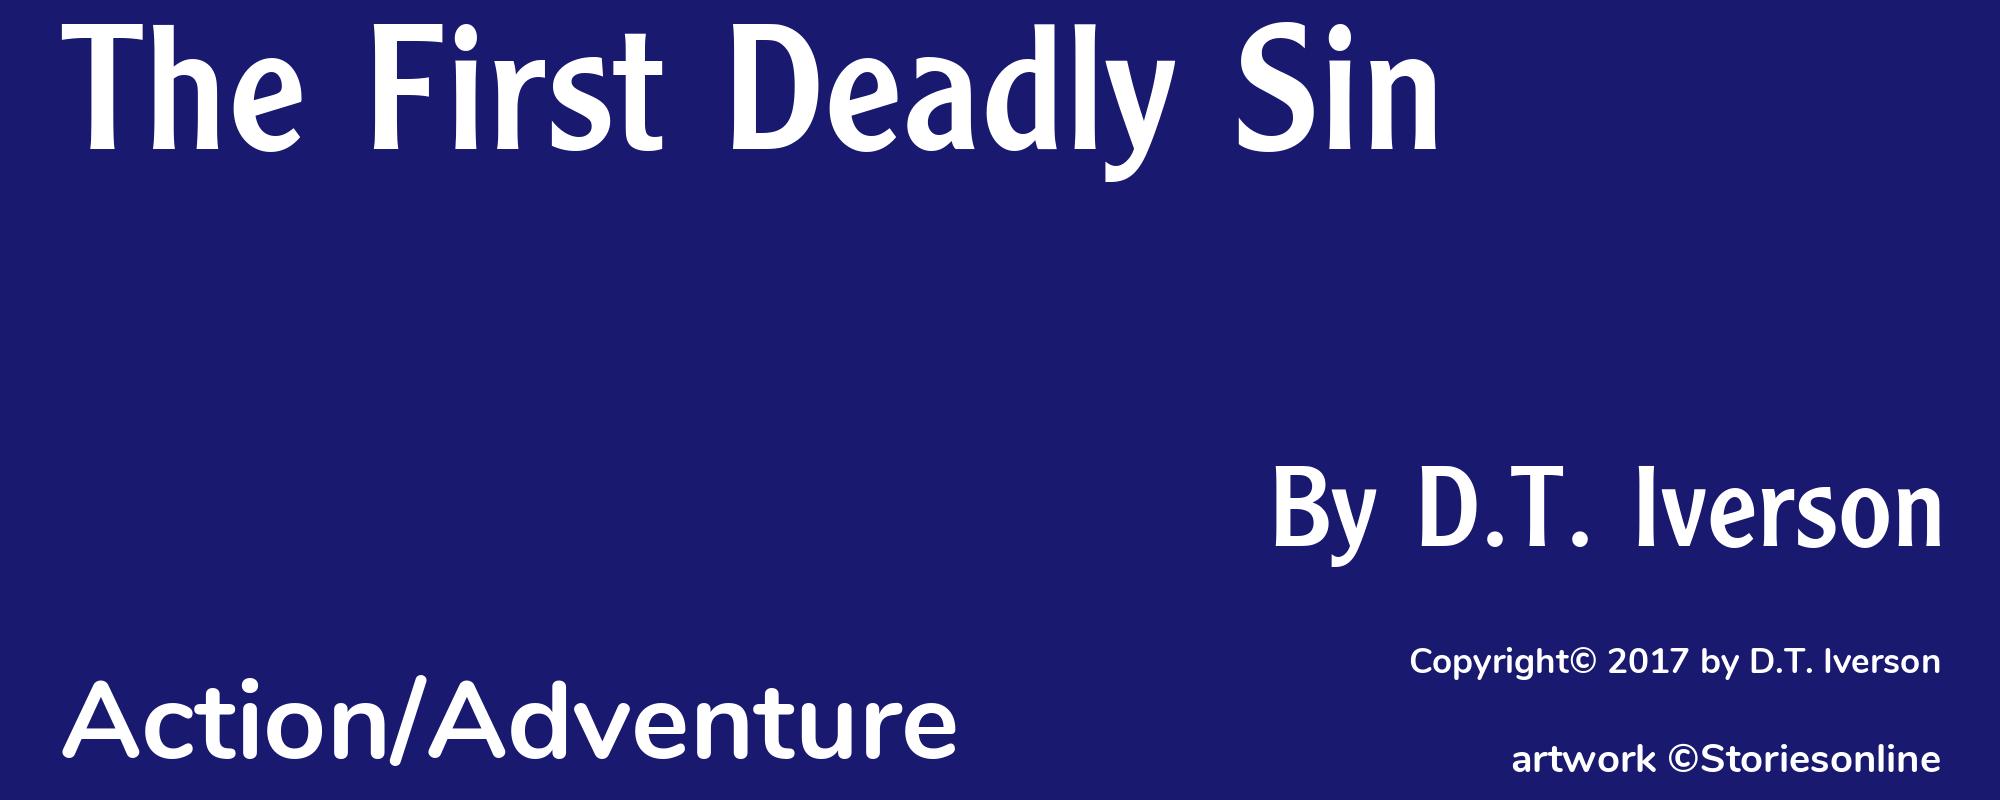 The First Deadly Sin - Cover